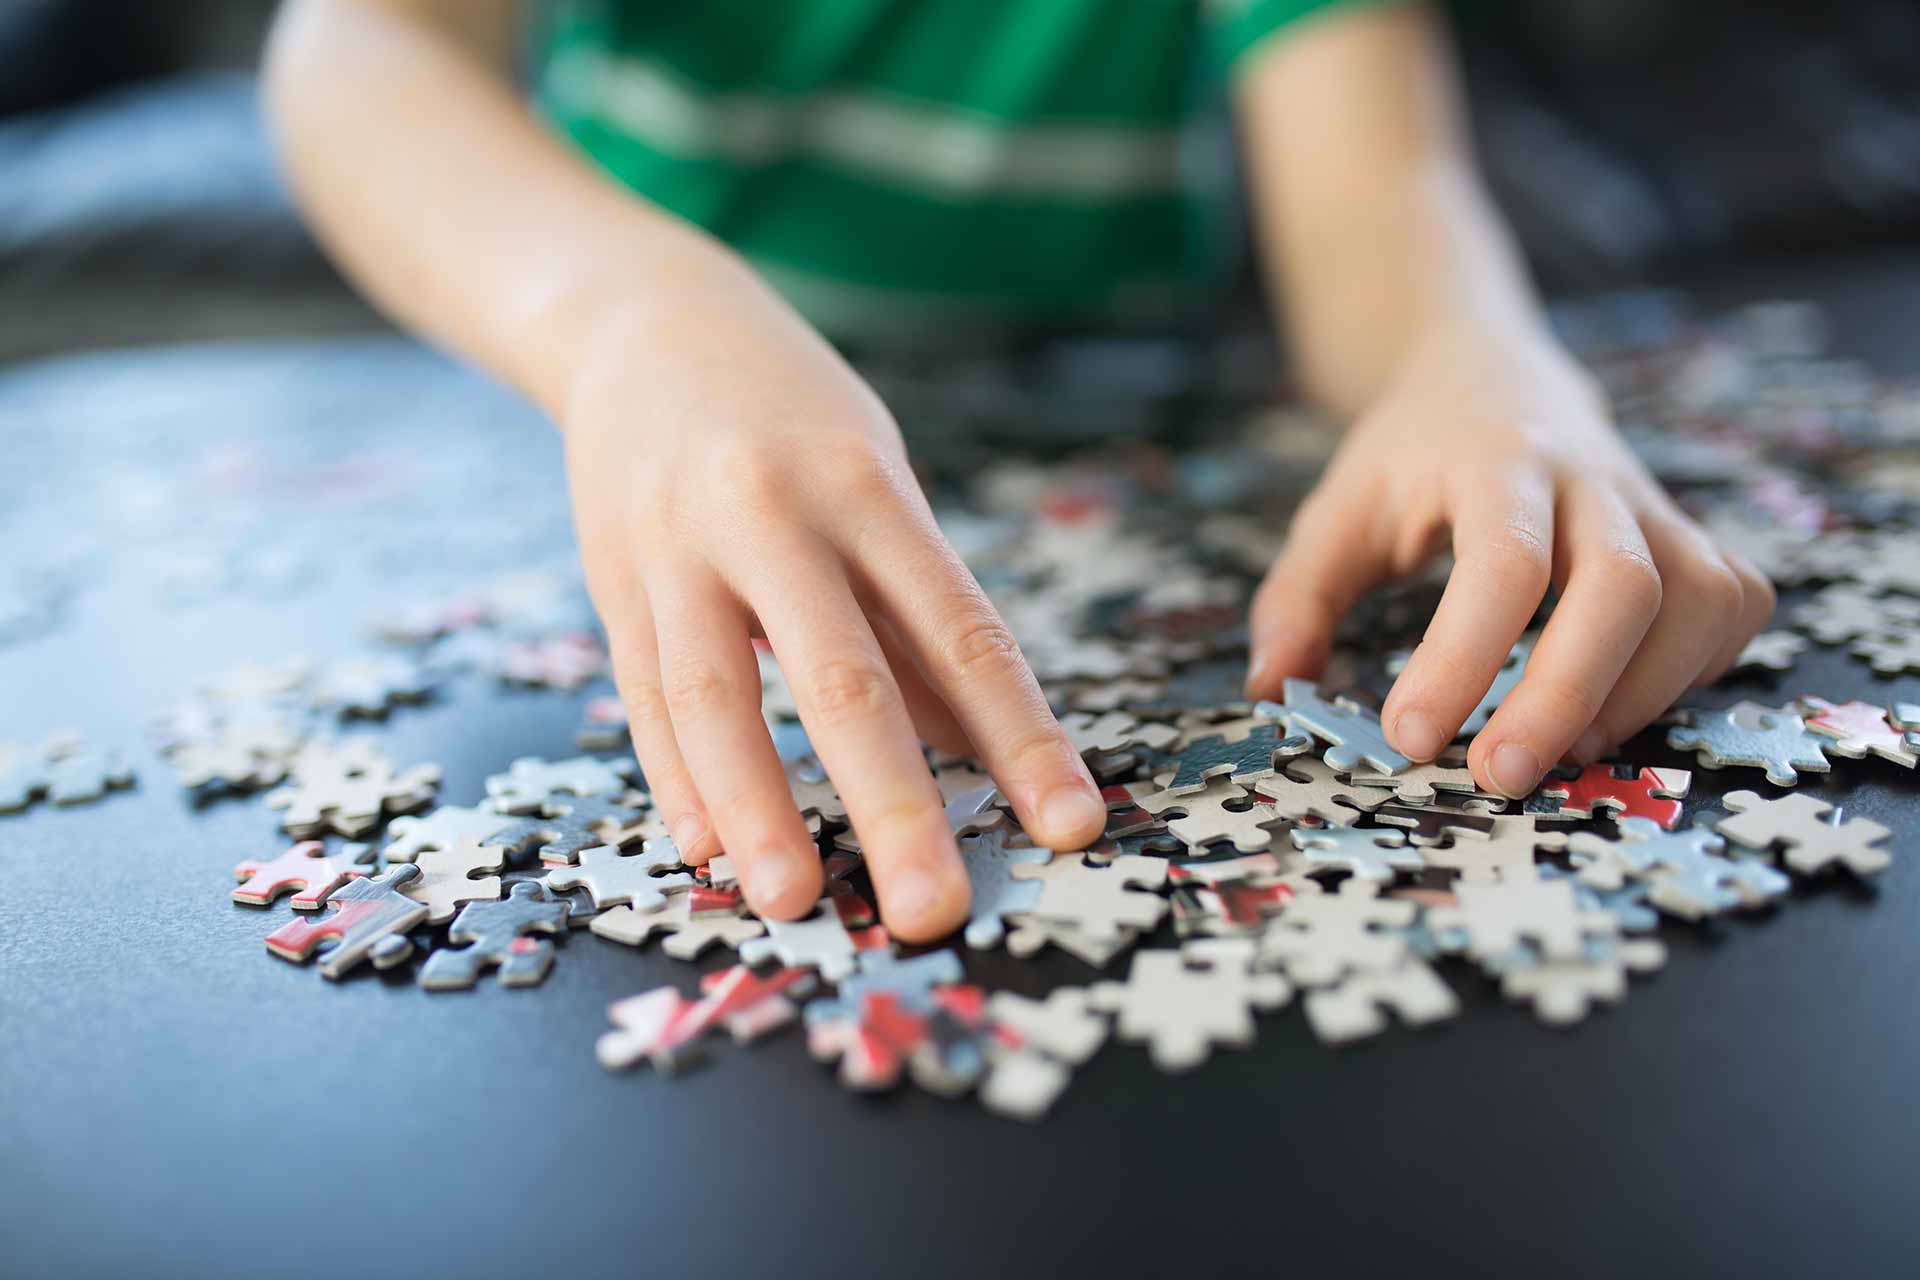 How Puzzles Help Develop Kids' Cognitive and Social Skills